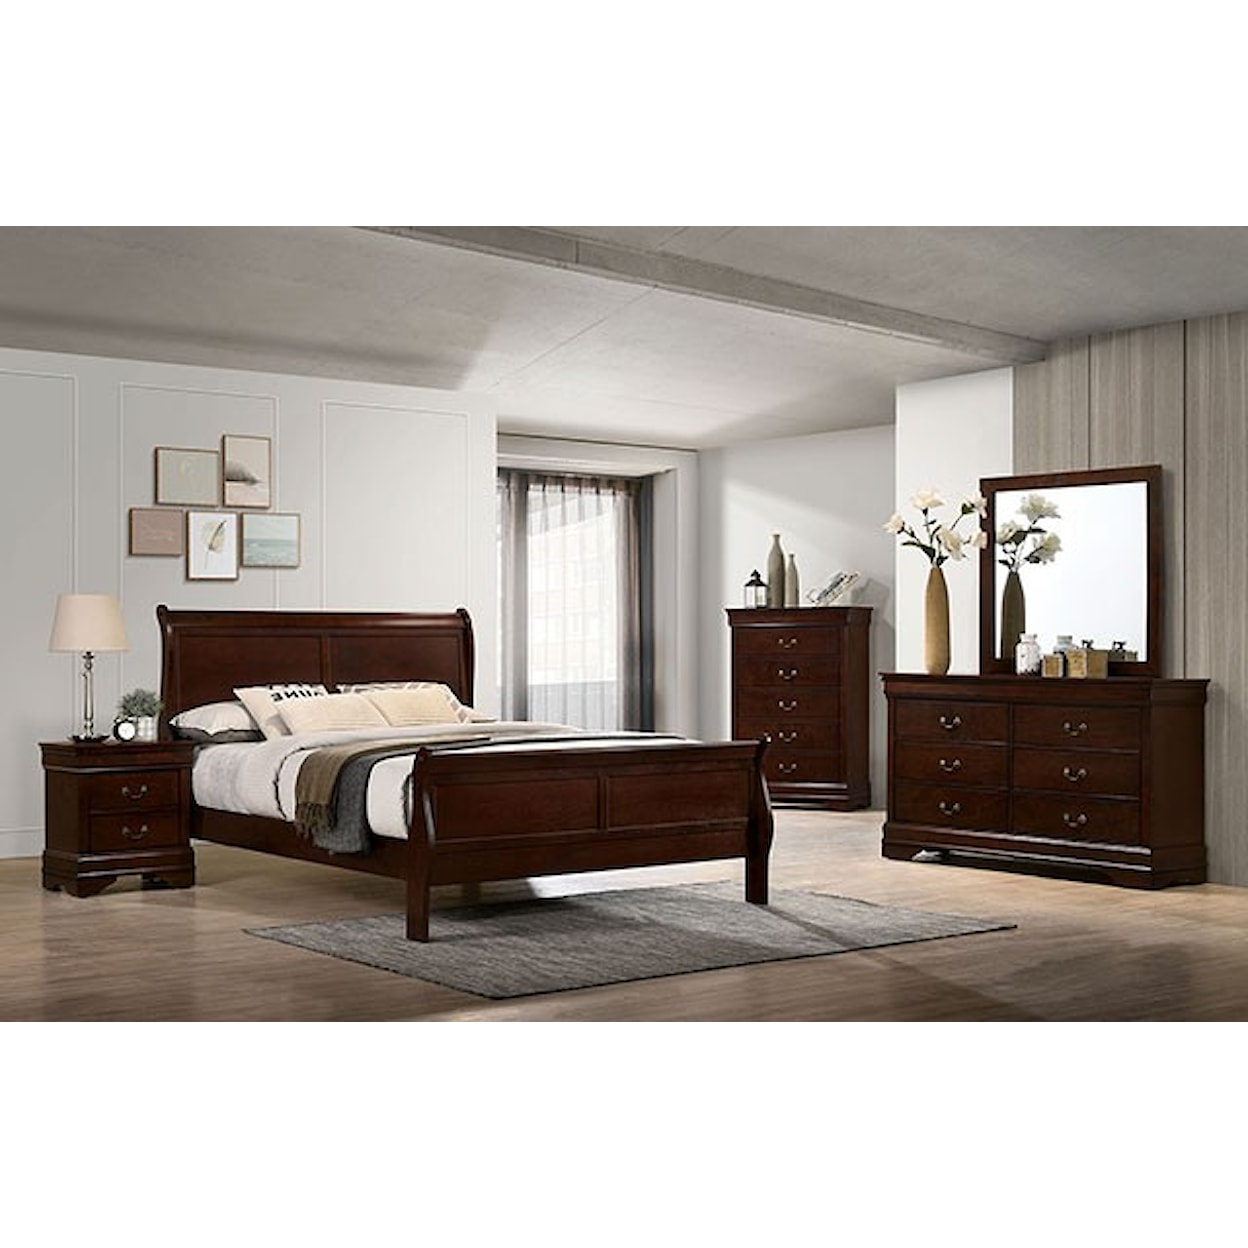 Furniture of America Louis Philippe Full Bed, Cherry